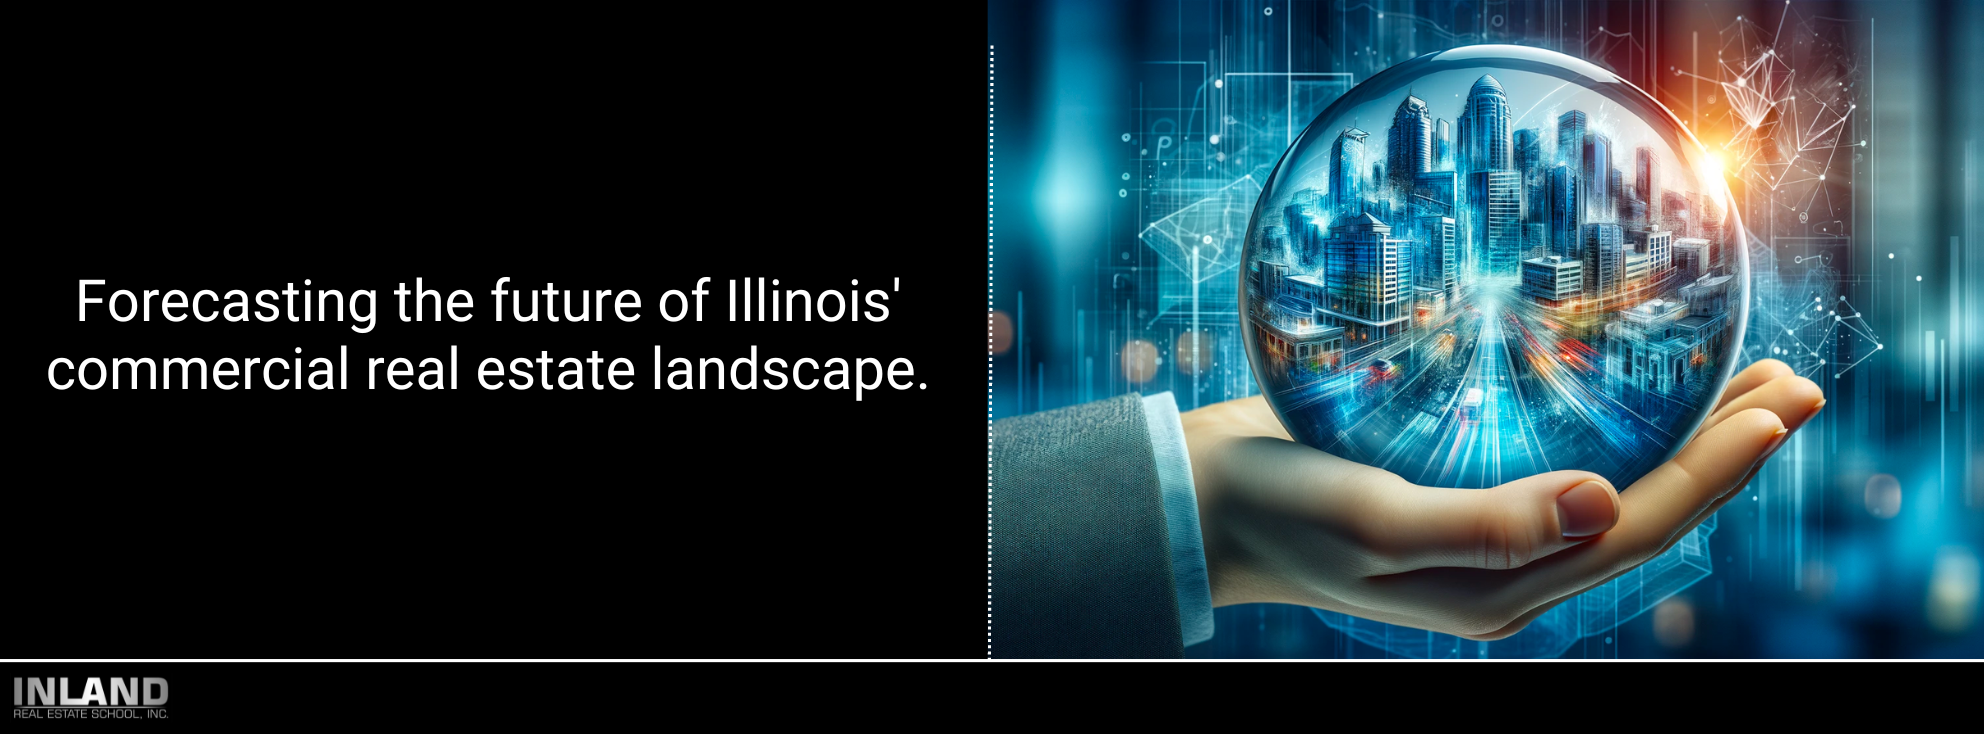 Crystal ball reflection of future trends in Illinois' commercial real estate.